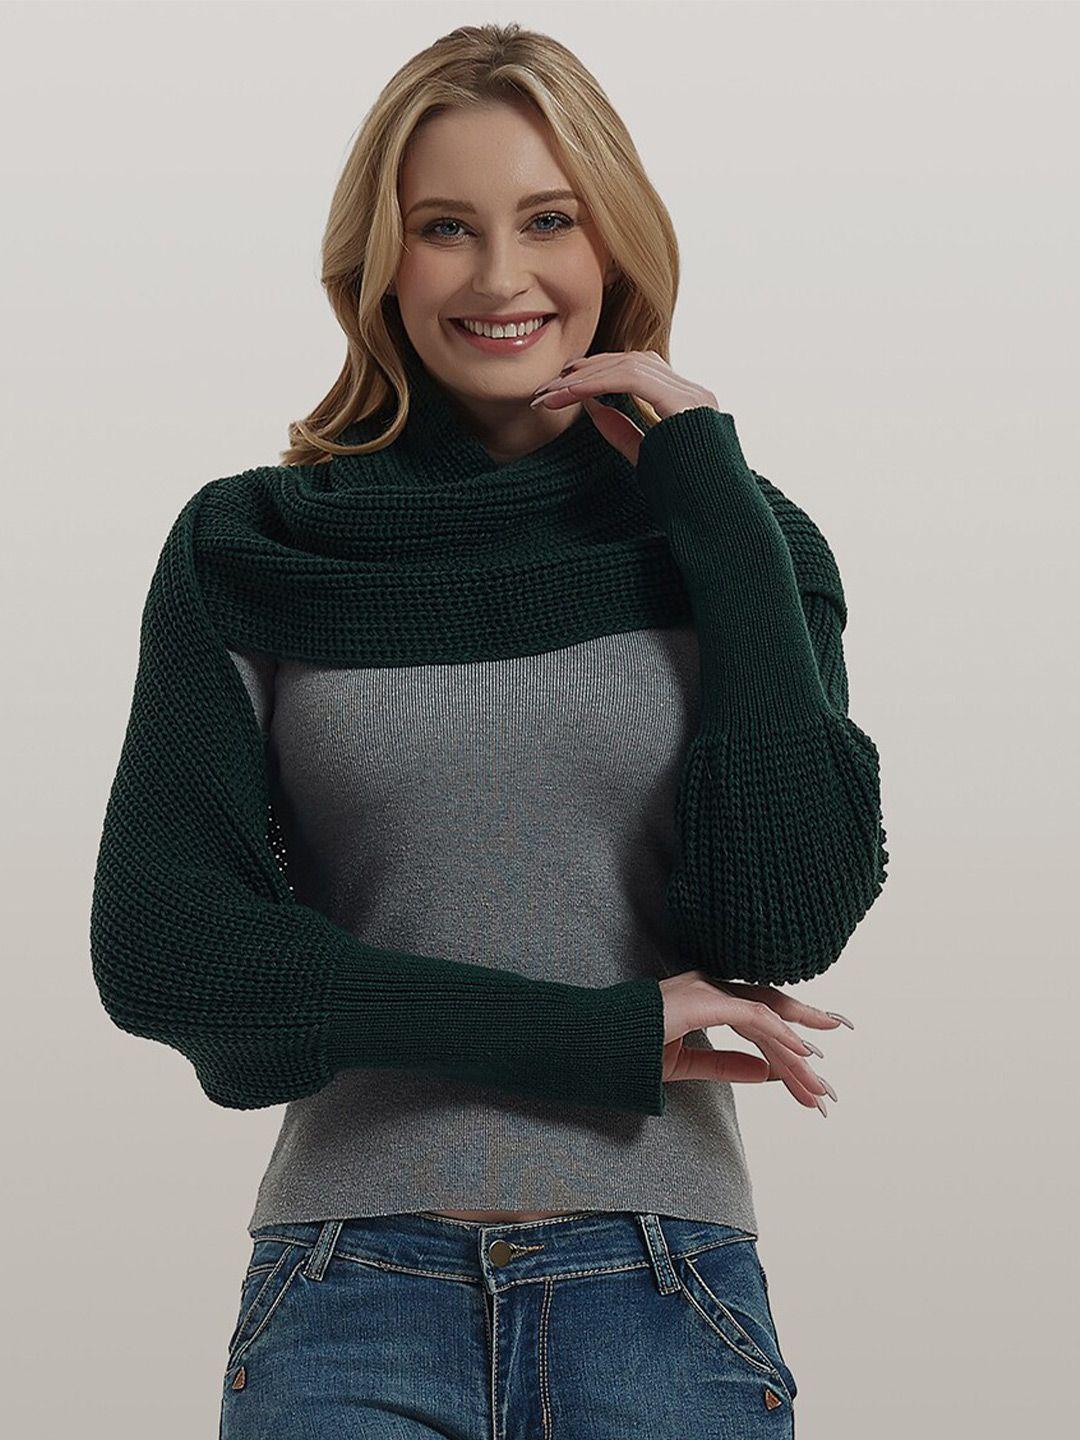 jc collection open knit self design turtle neck crop pullover sweater